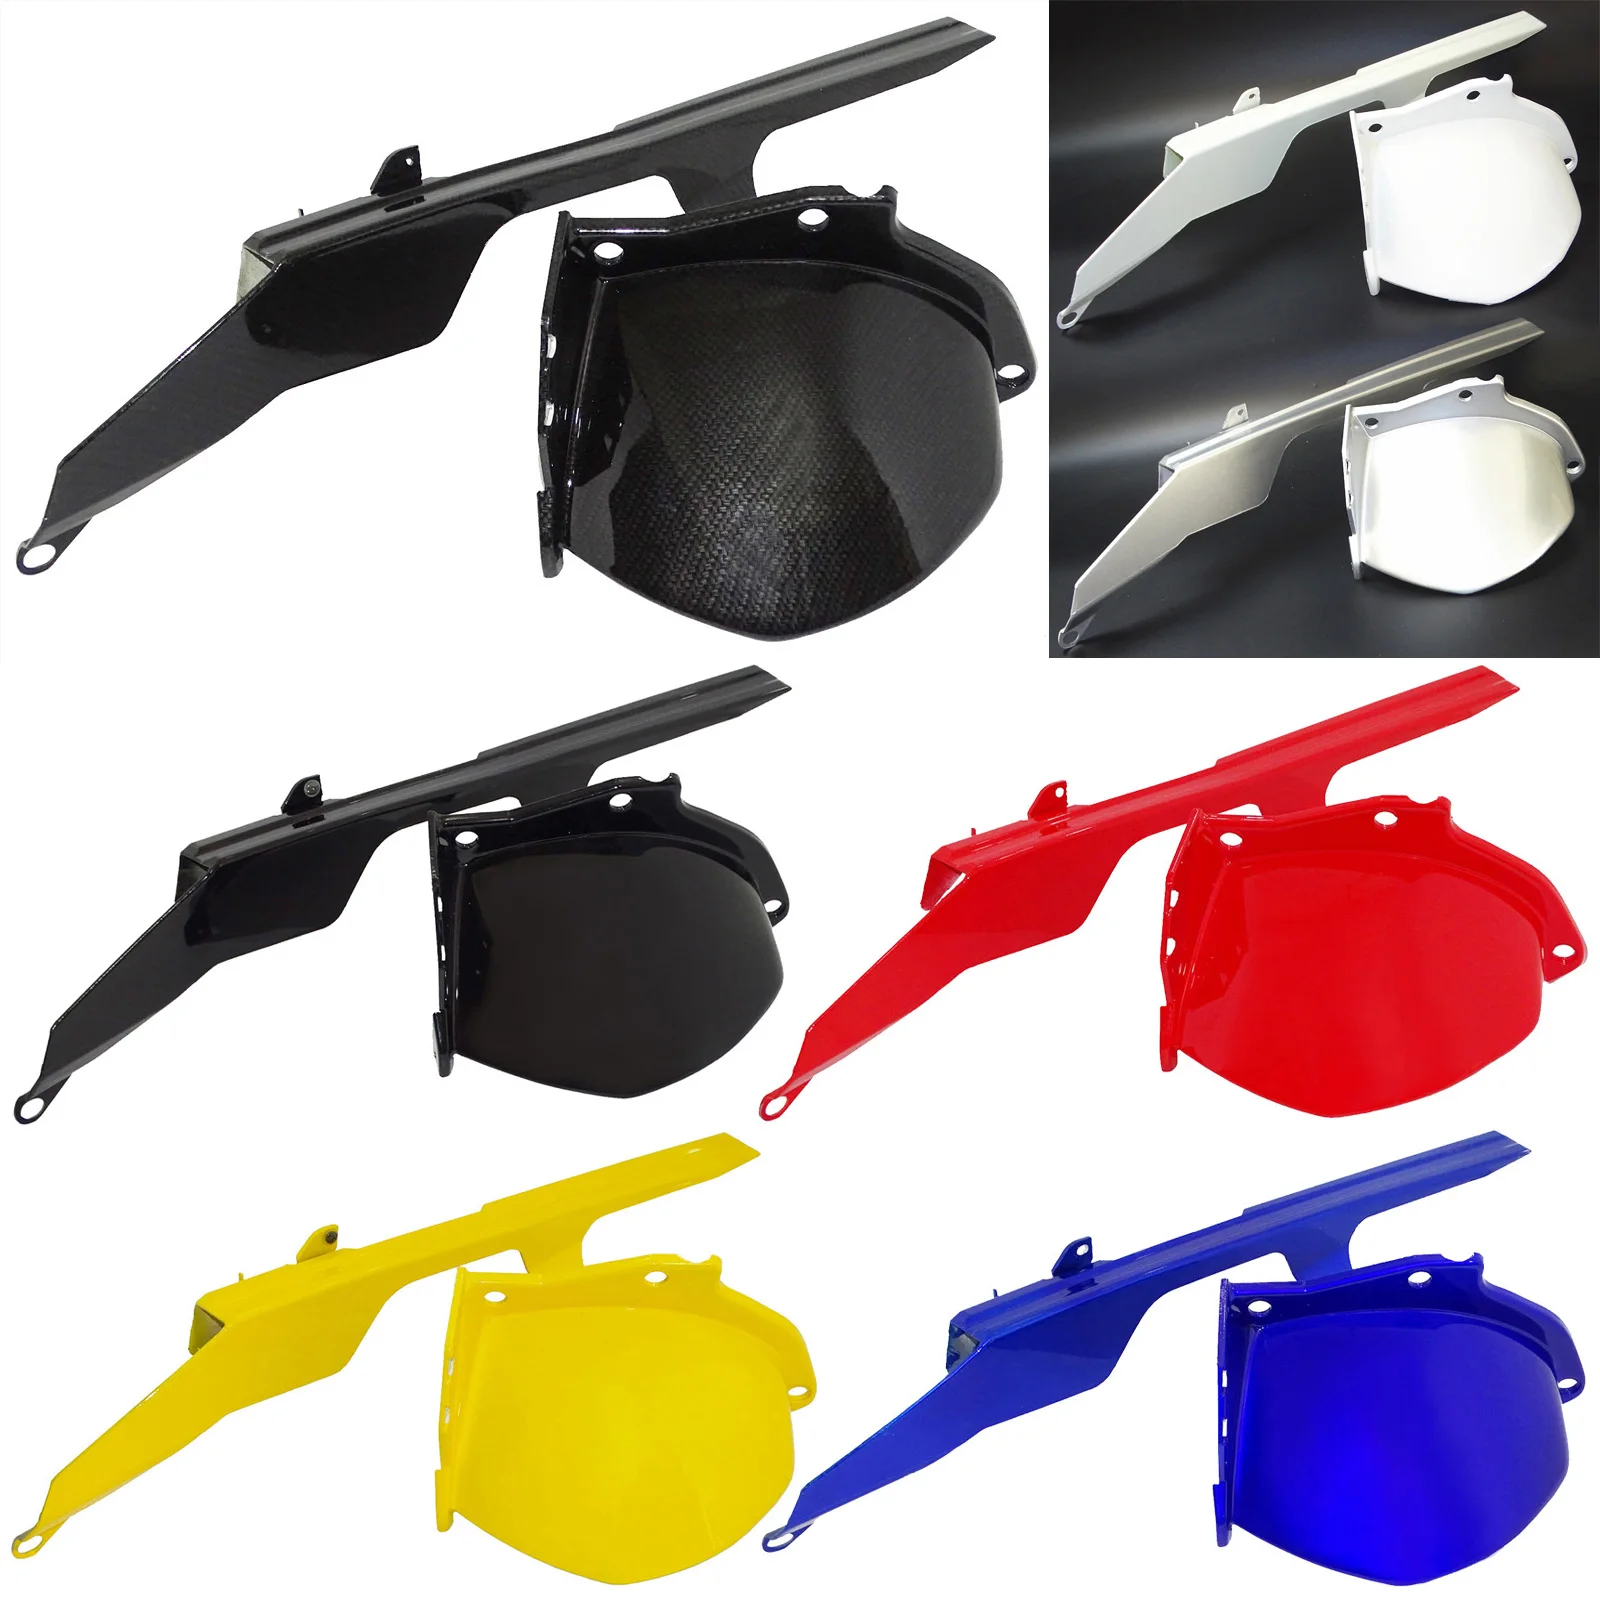 Details about   Rear Tire Hugger Fender Mudguard Mudflap For 1998-2001 YAMAHA YZF R1 RN01 RN04